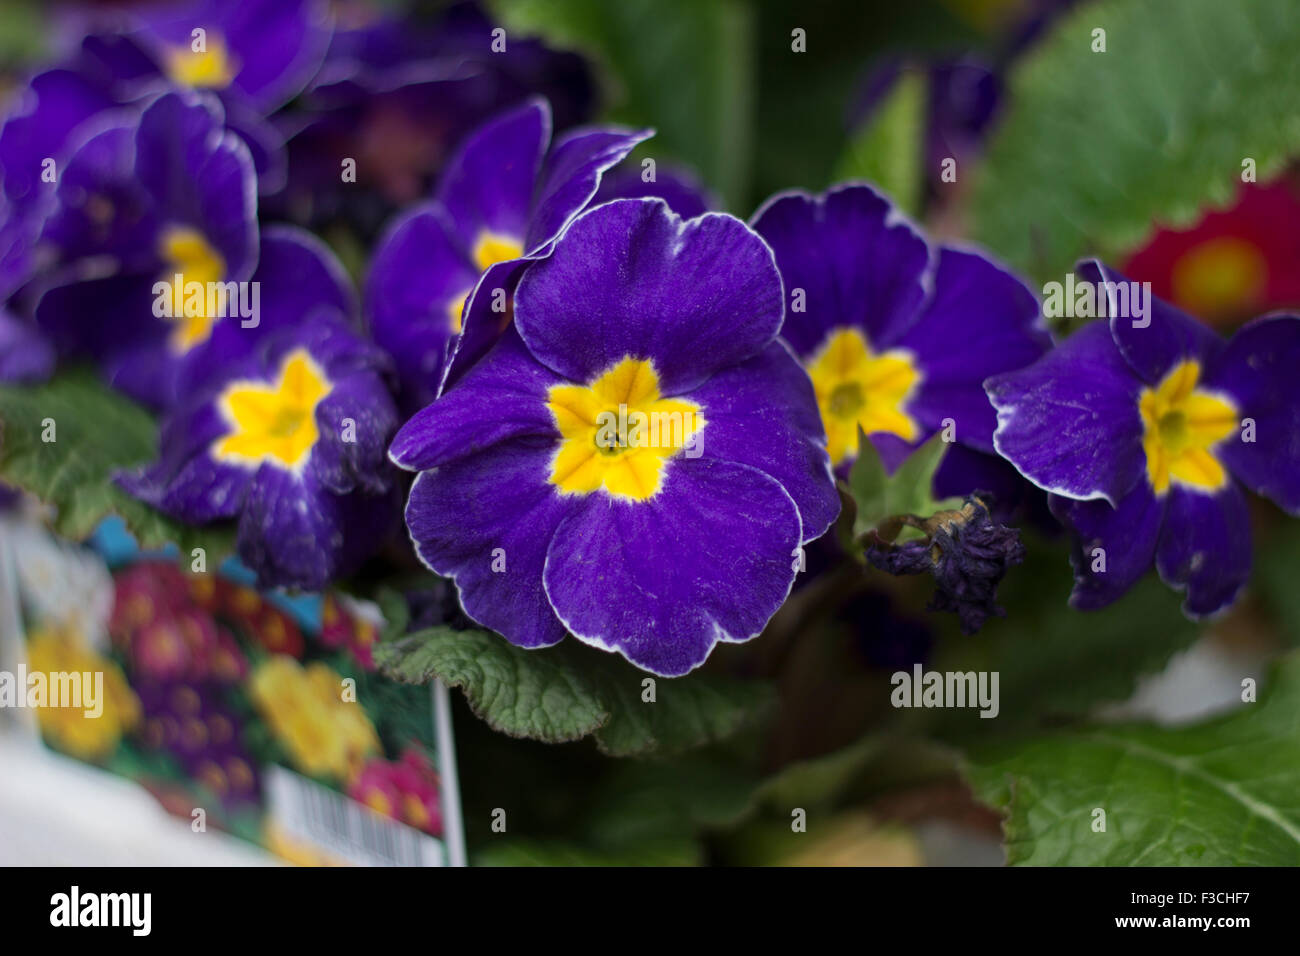 Close up image of purple and yellow flower Stock Photo